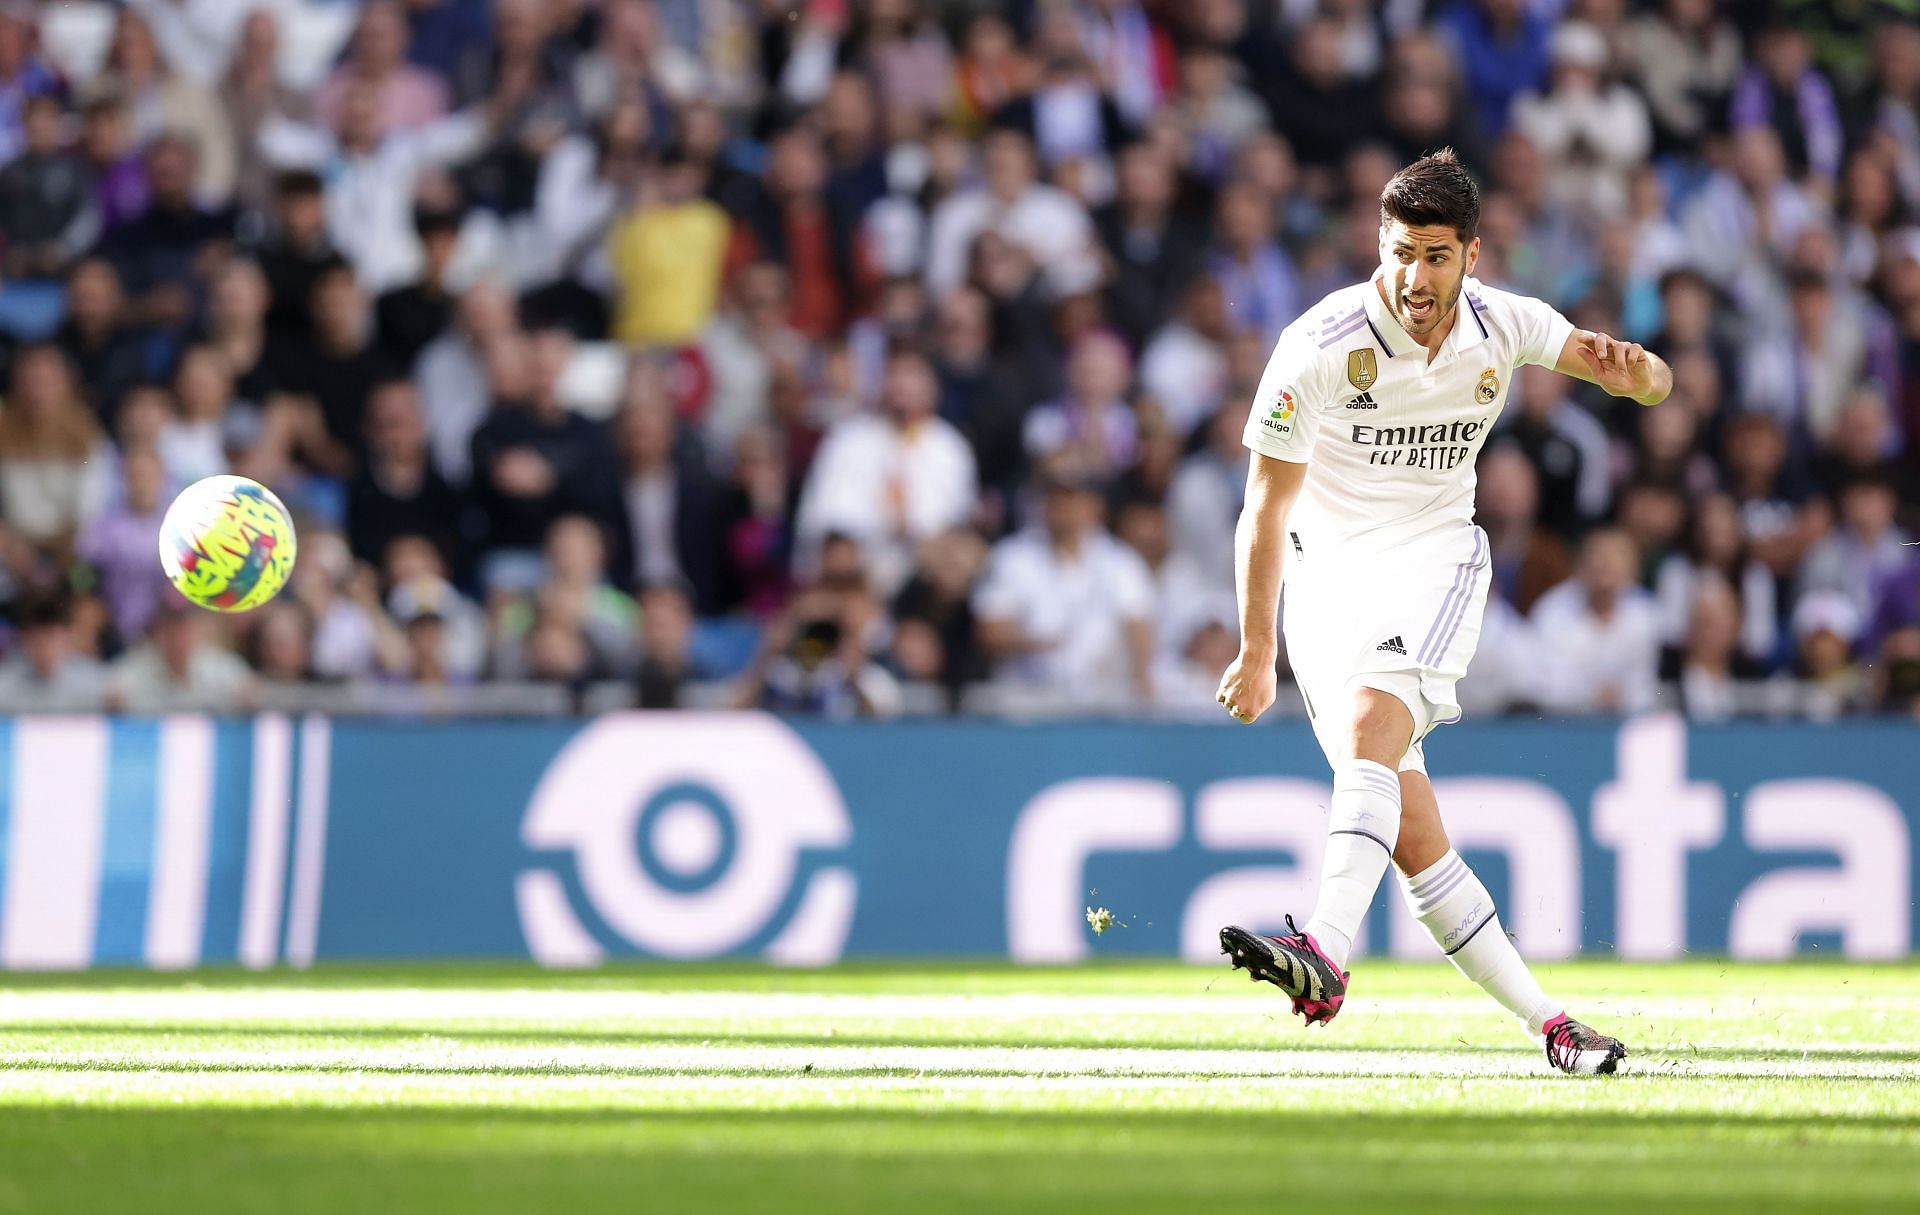 Marco Asensio could extend his stay at the Santiago Bernabeu.